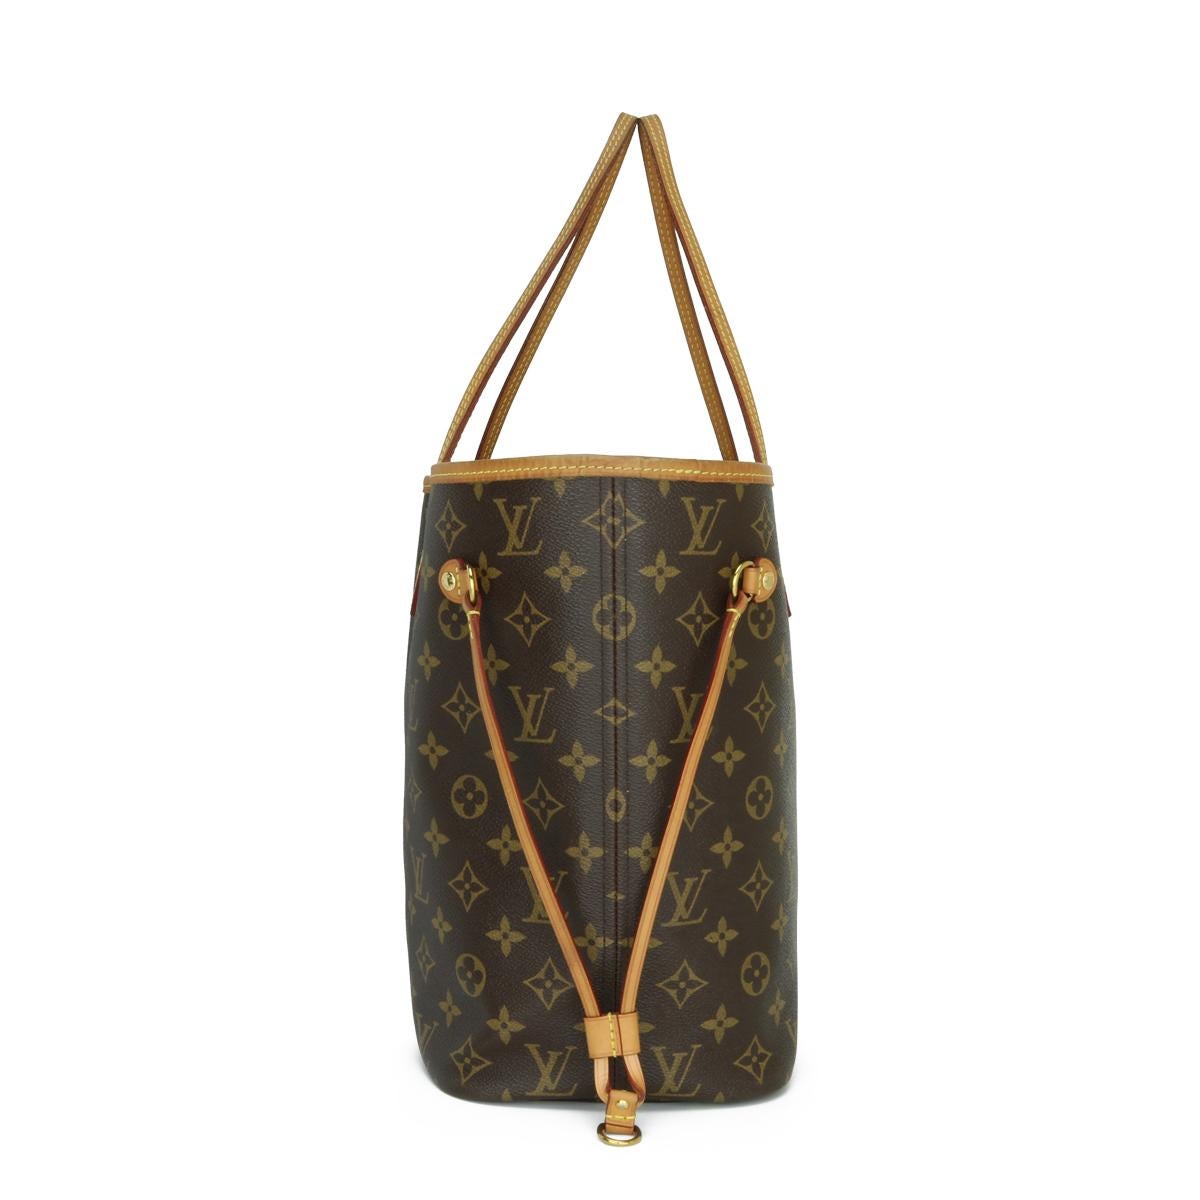 Black Louis Vuitton Neverfull MM Tote in Monogram with Beige Interior 2018 For Sale